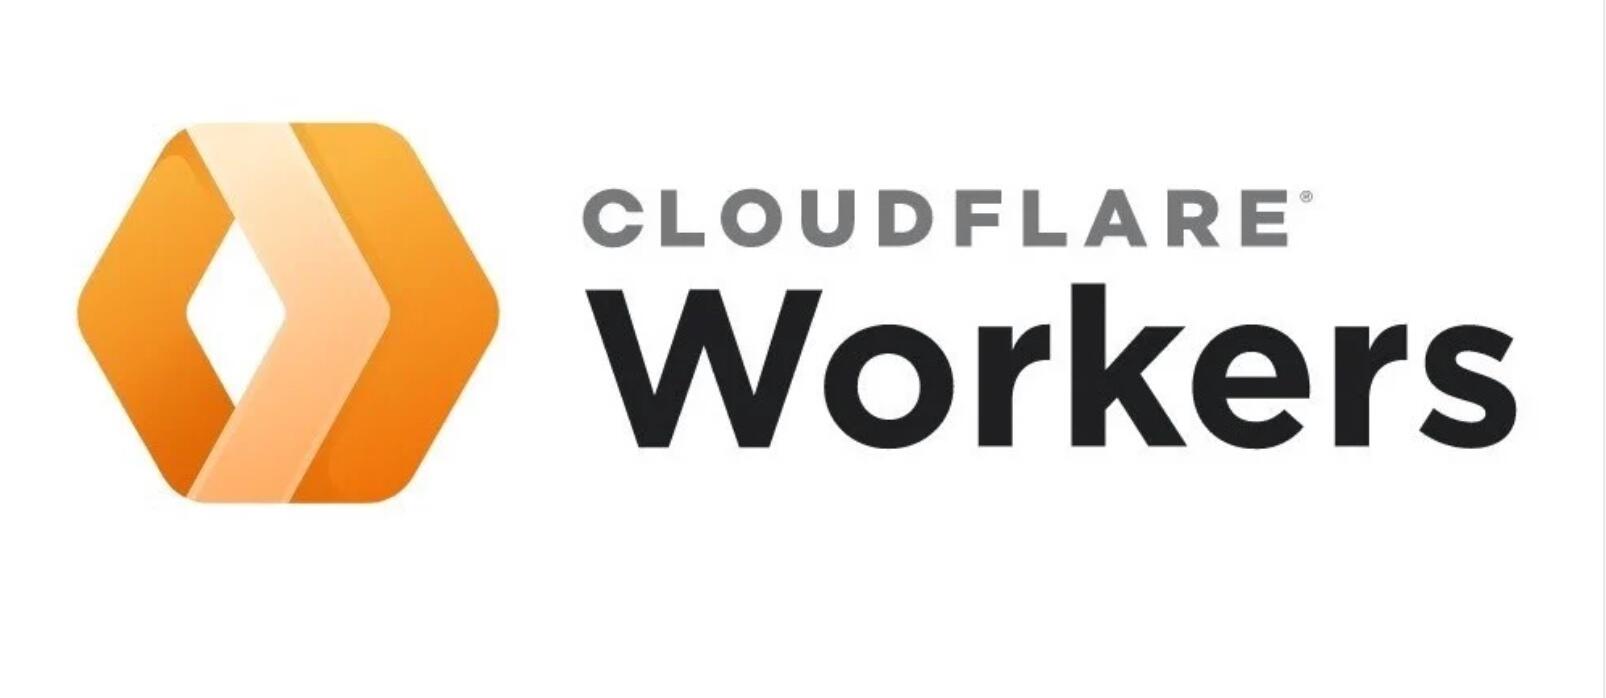 Cloudflare Worker